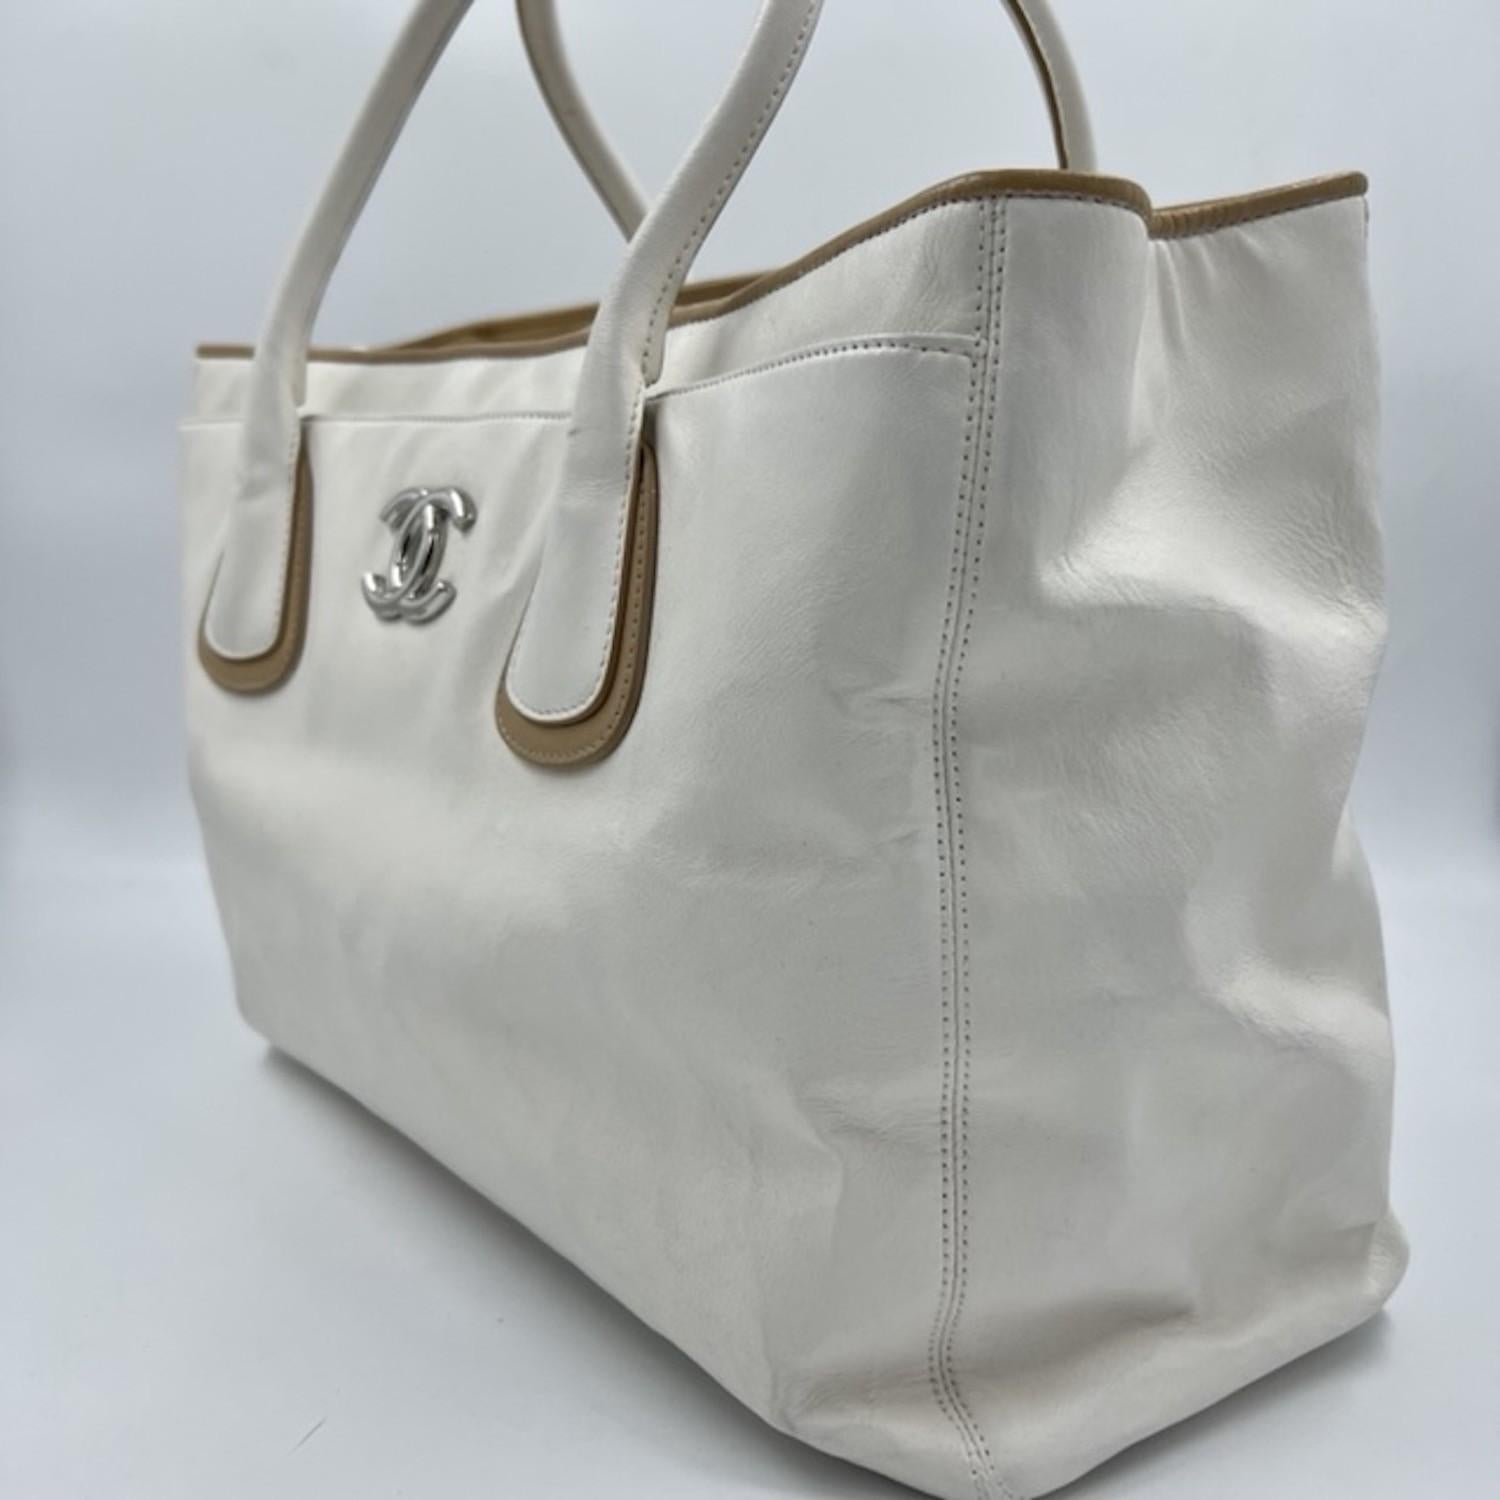 Women's CHANEL Beige Tote Bag in Leather For Sale